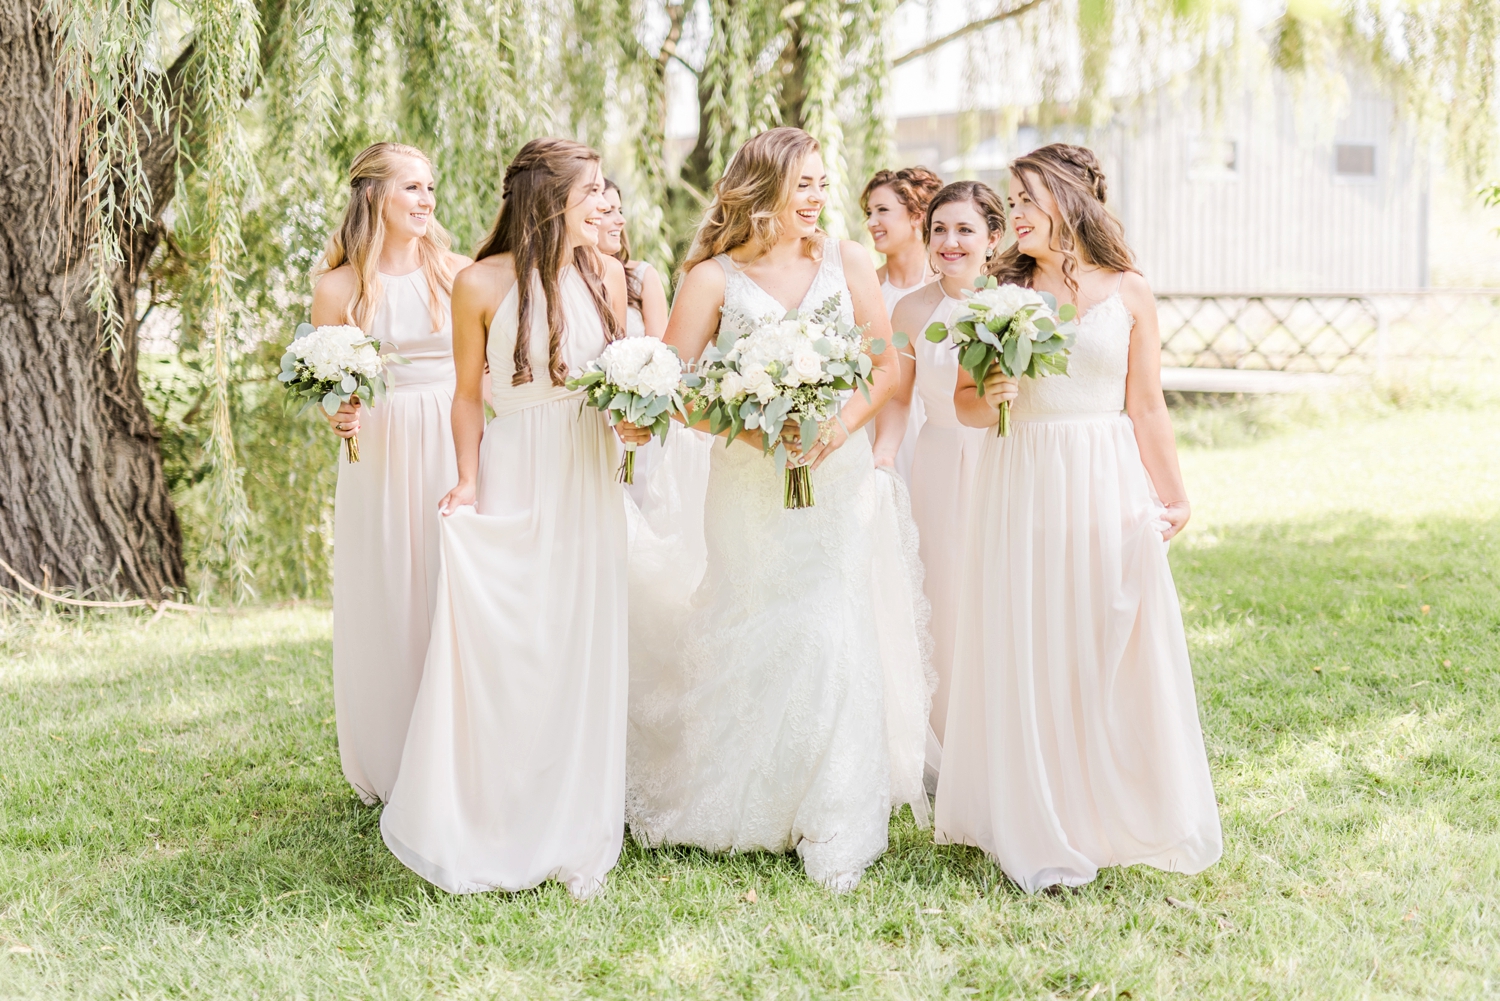 southern-classic-style-inspiration-for-a-wedding